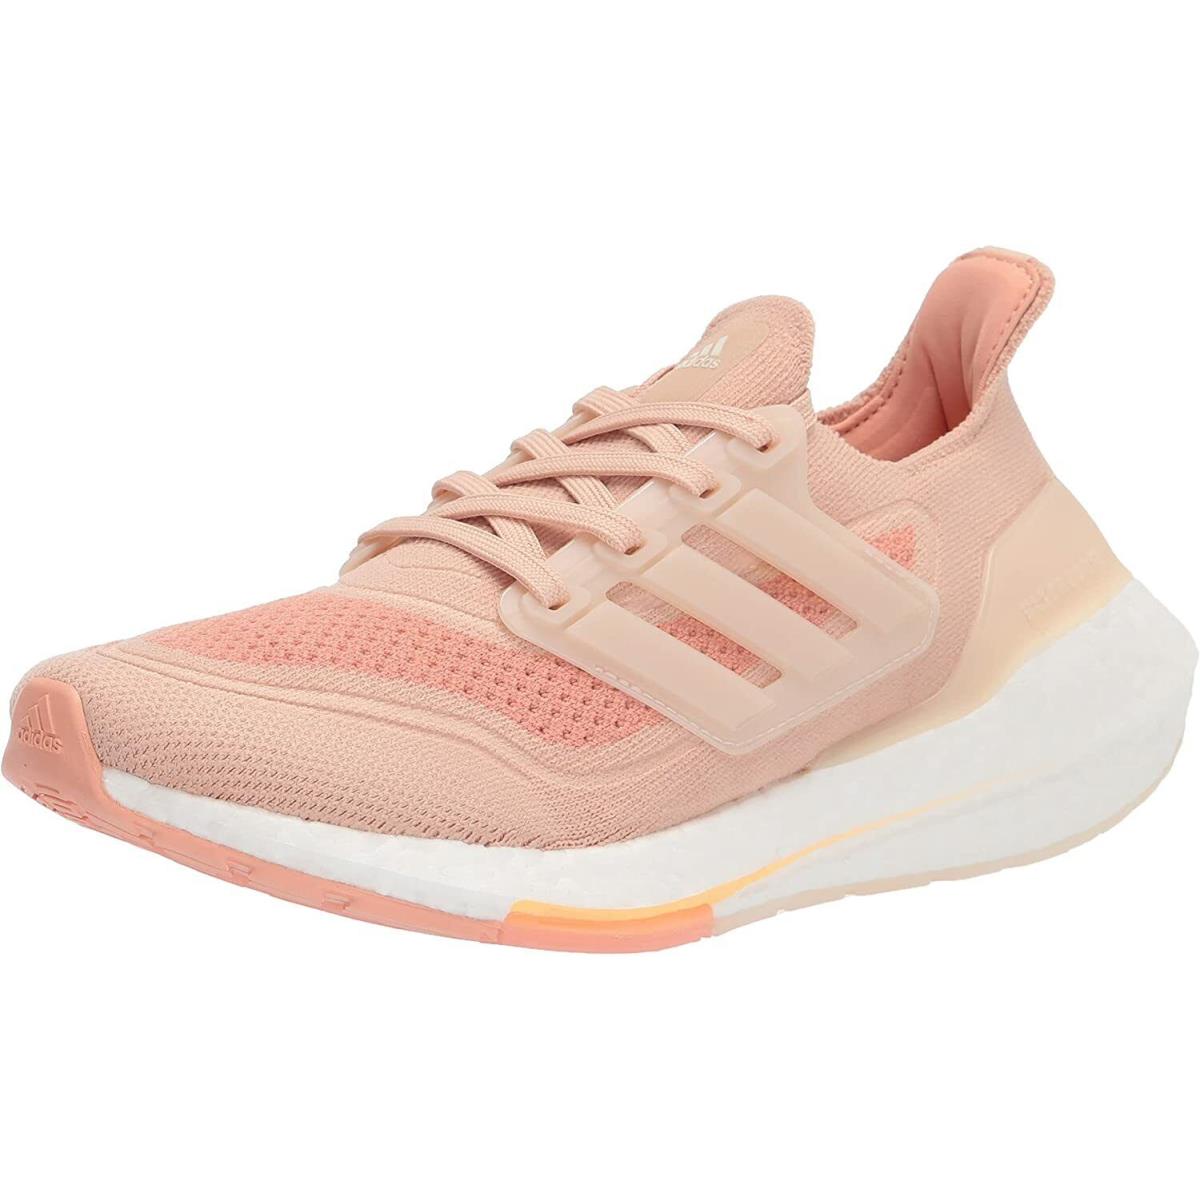 Adidas Womens Ultraboost 21 W Running Shoes S23838 - Multicolor